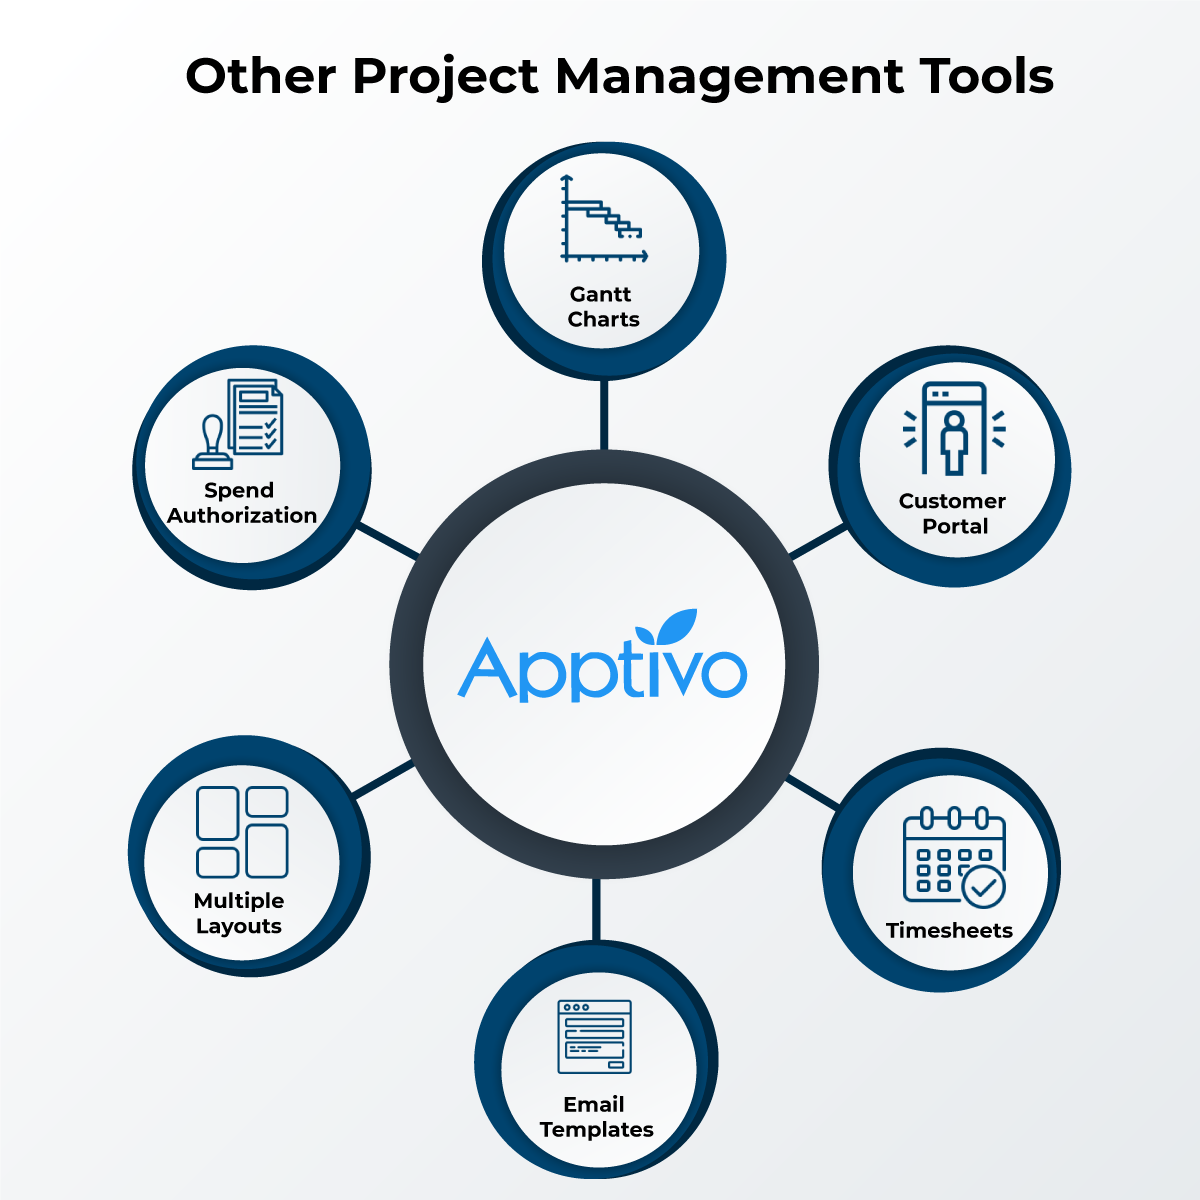 Other project management tools